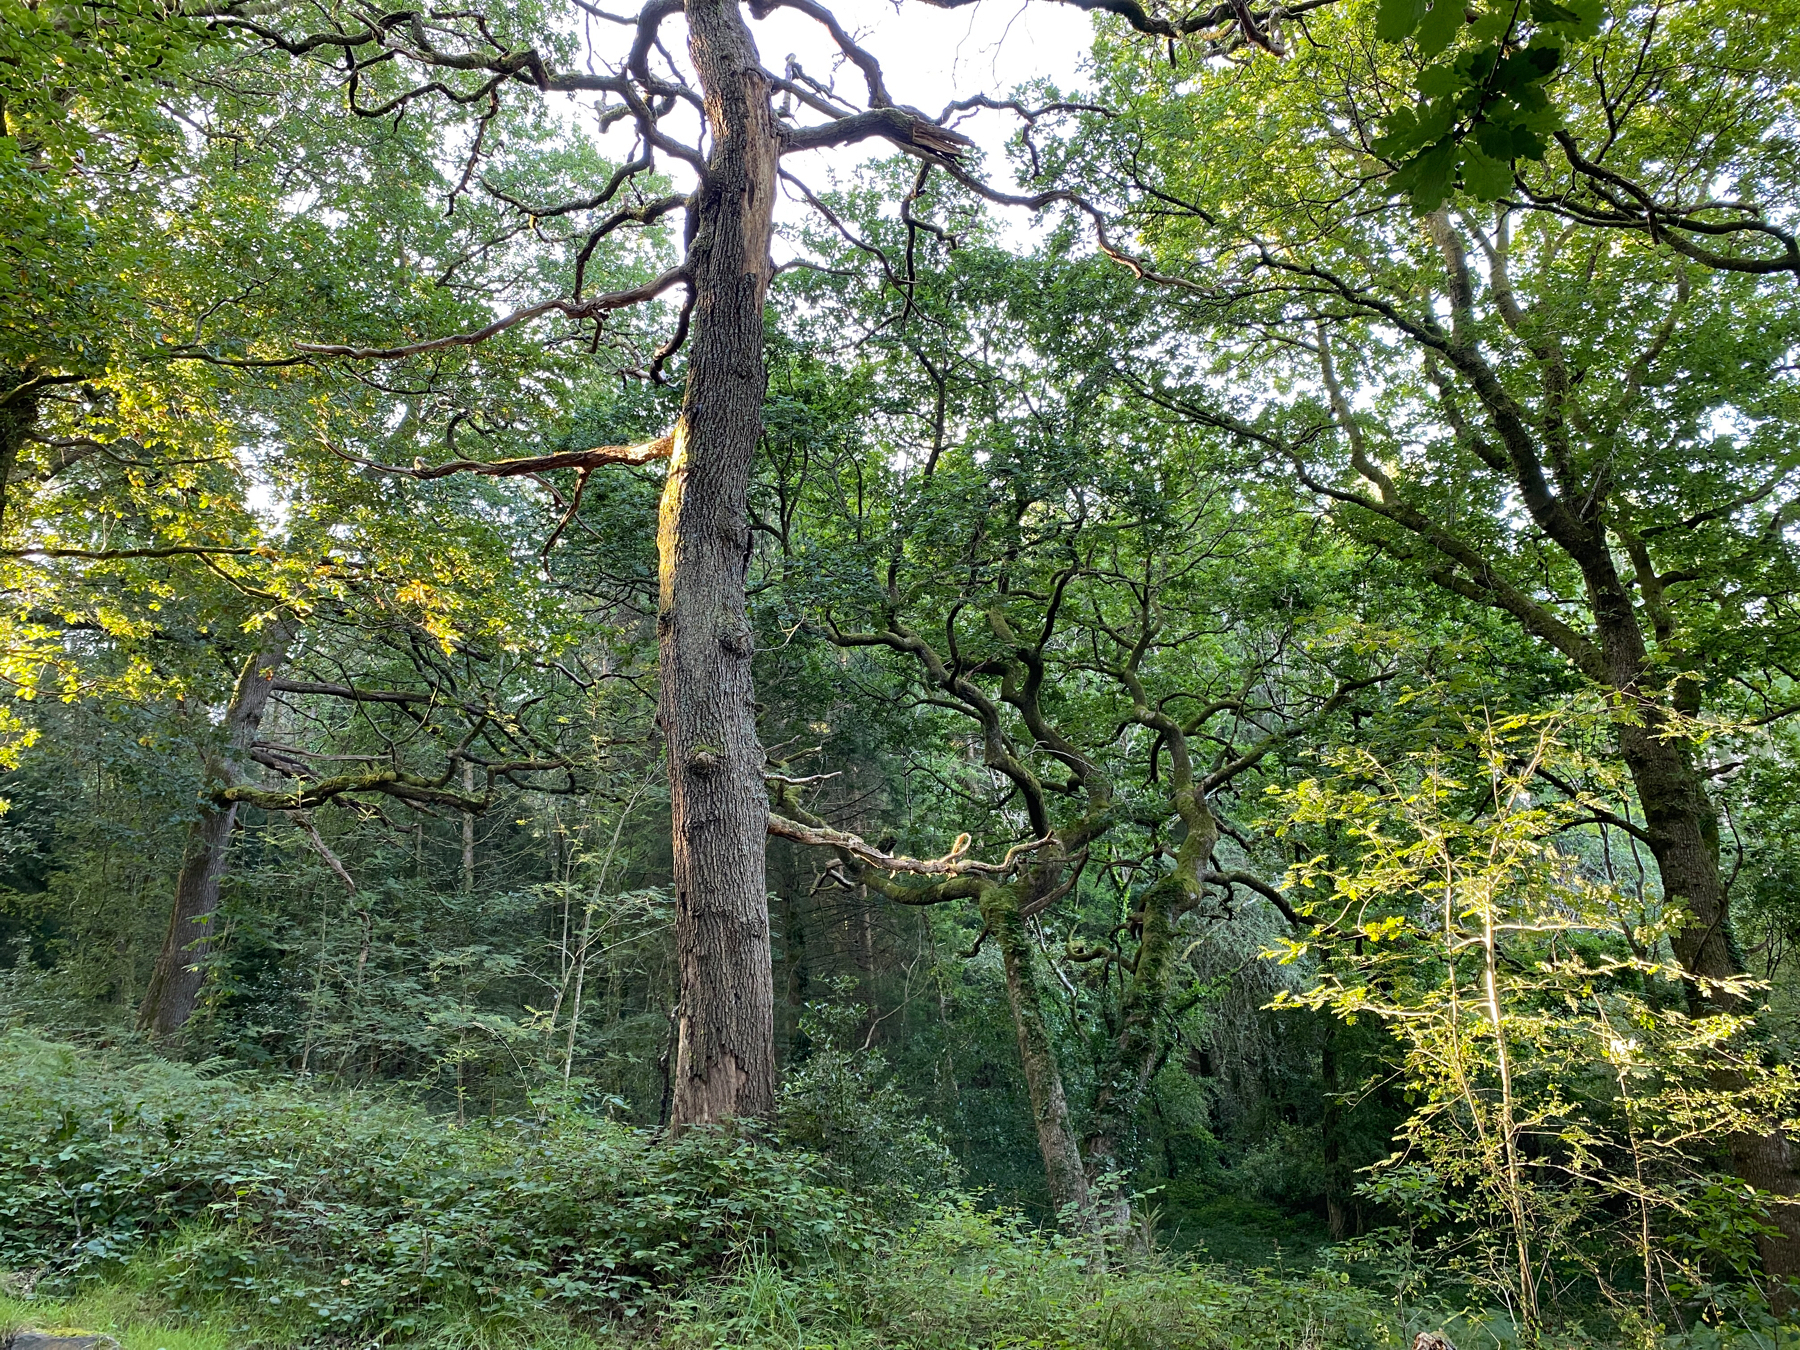 Deciduous forestscape with central bare branching oak trunk surrounded by greenery, early morning sunlight illuminating the scene from low on the left